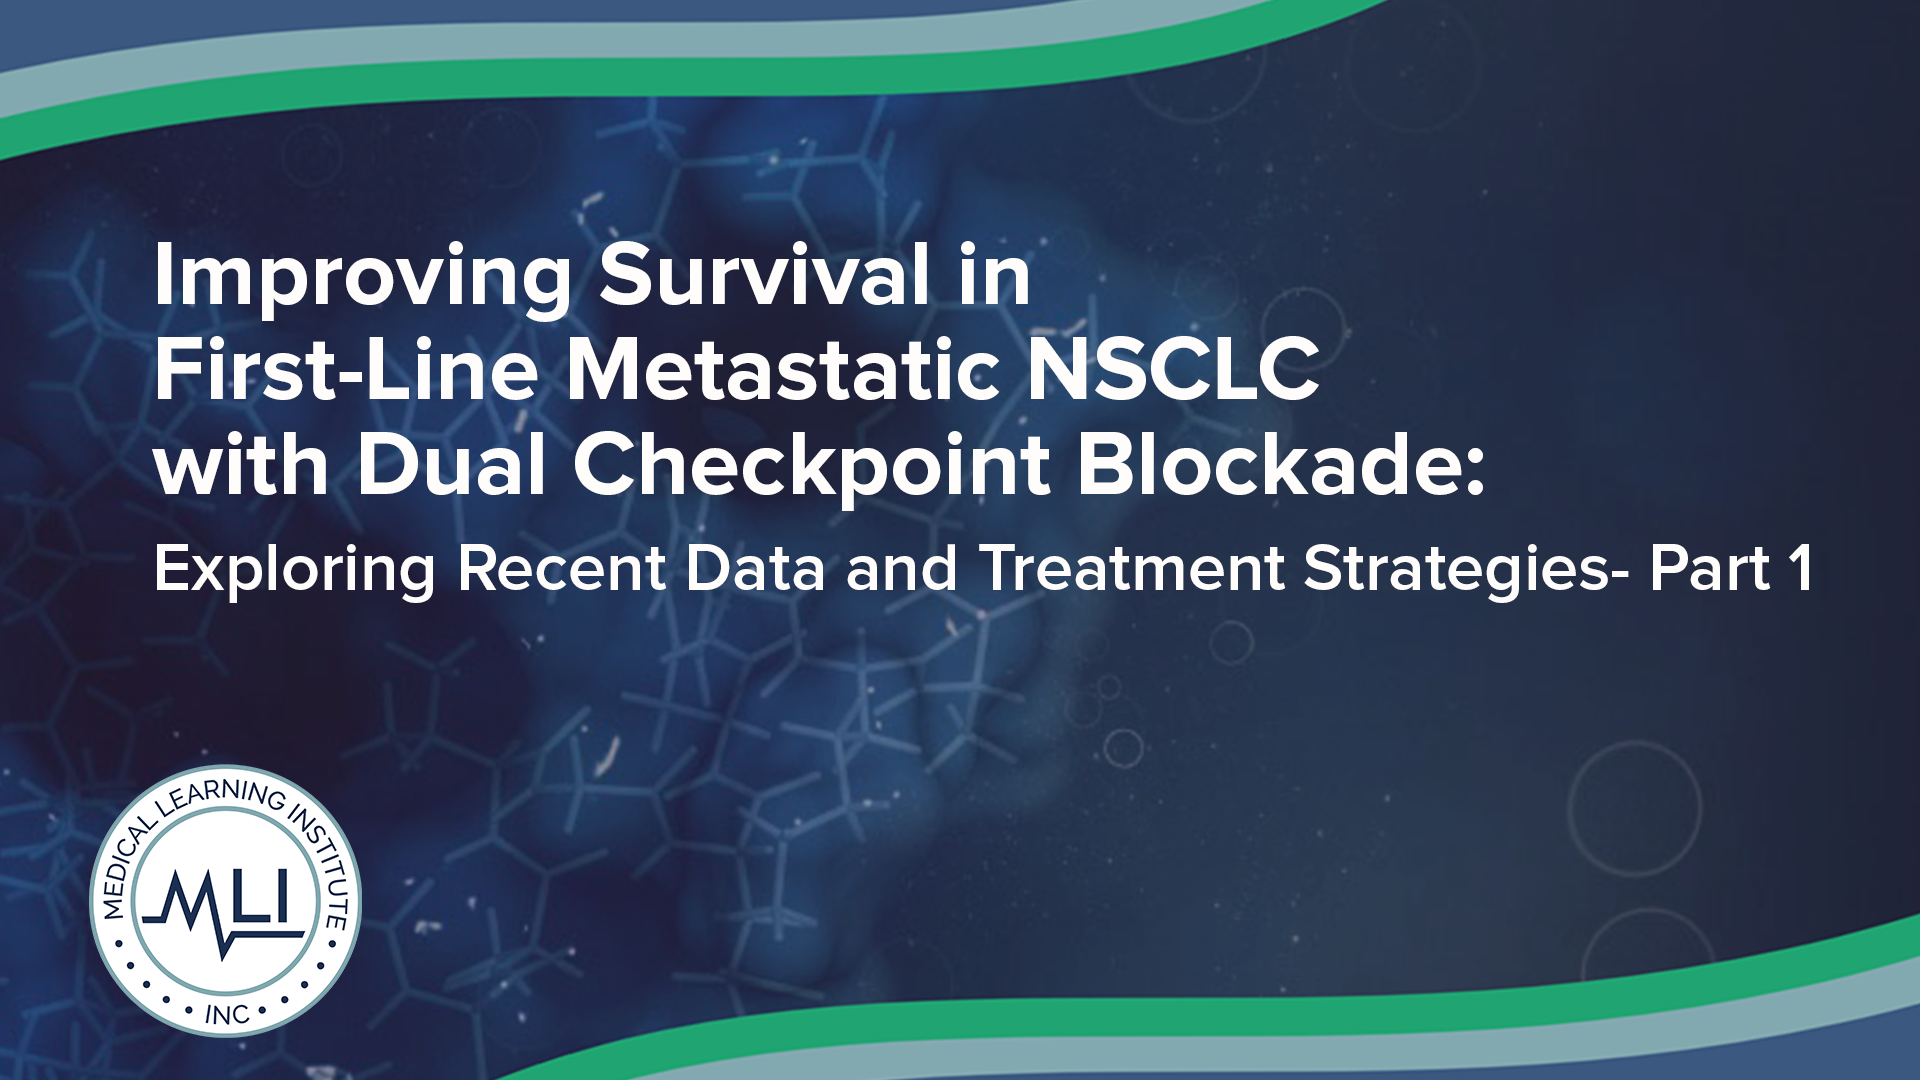 Improving Survival in First-Line Metastatic NSCLC with Dual Checkpoint Blockade: Exploring Recent Data and Treatment Strategies